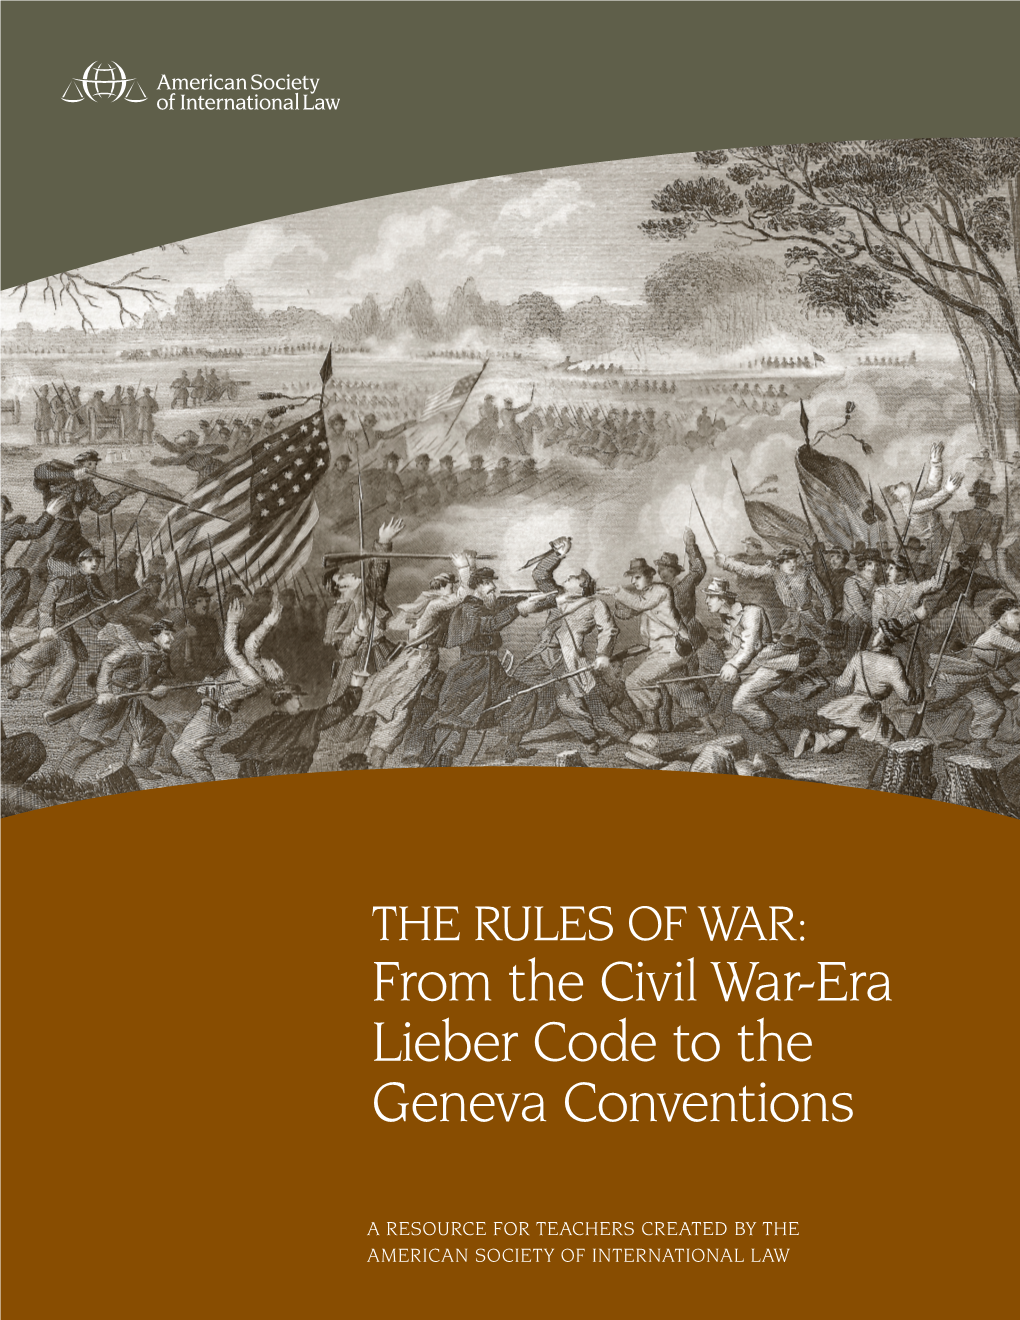 From the Civil War-Era Lieber Code to the Geneva Conventions